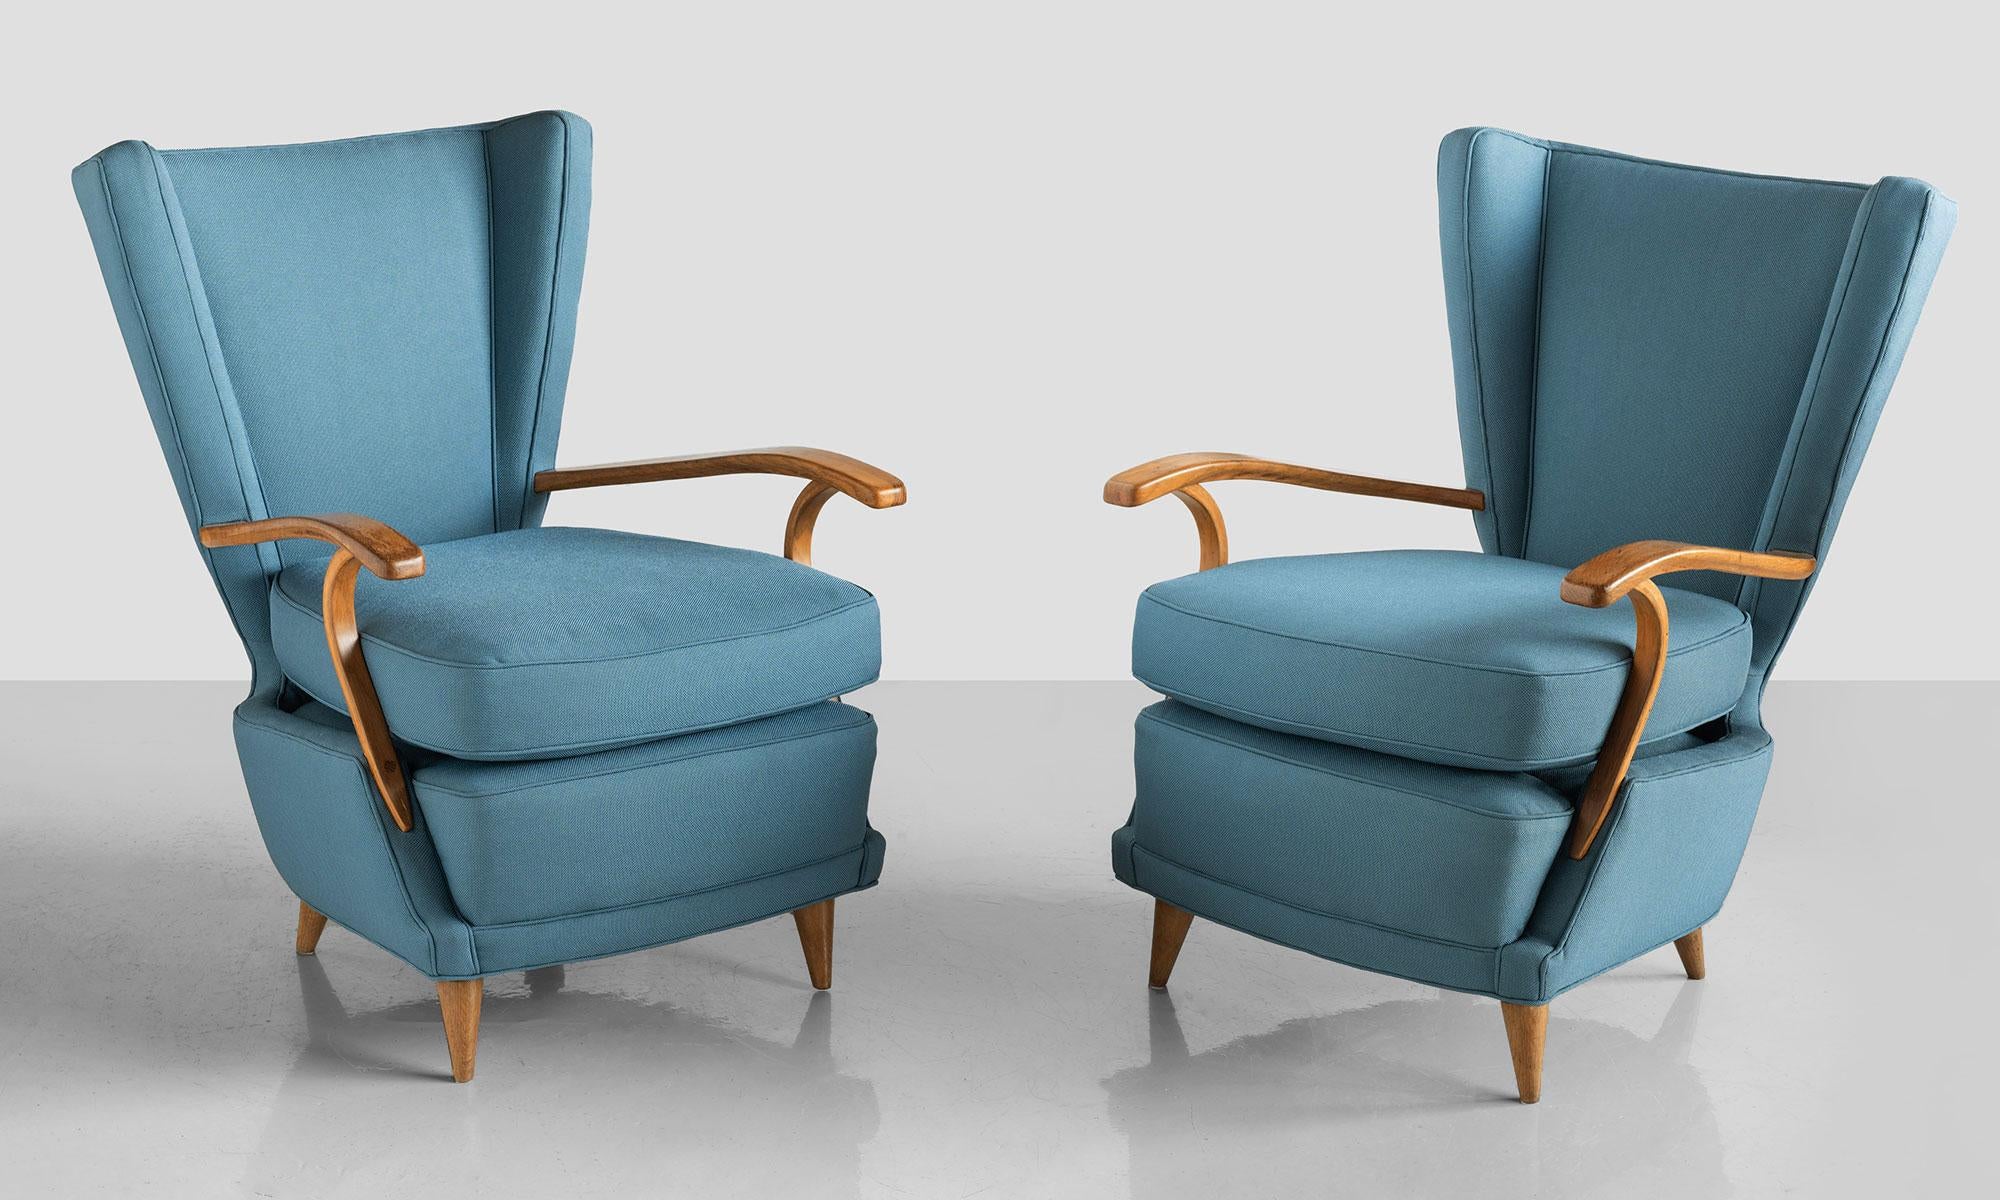 Pair of Curved Plywood Armchairs, Italy, circa 1950.

Dynamic form, with bentwood arms, newly reupholstered in Maharam Fabric.